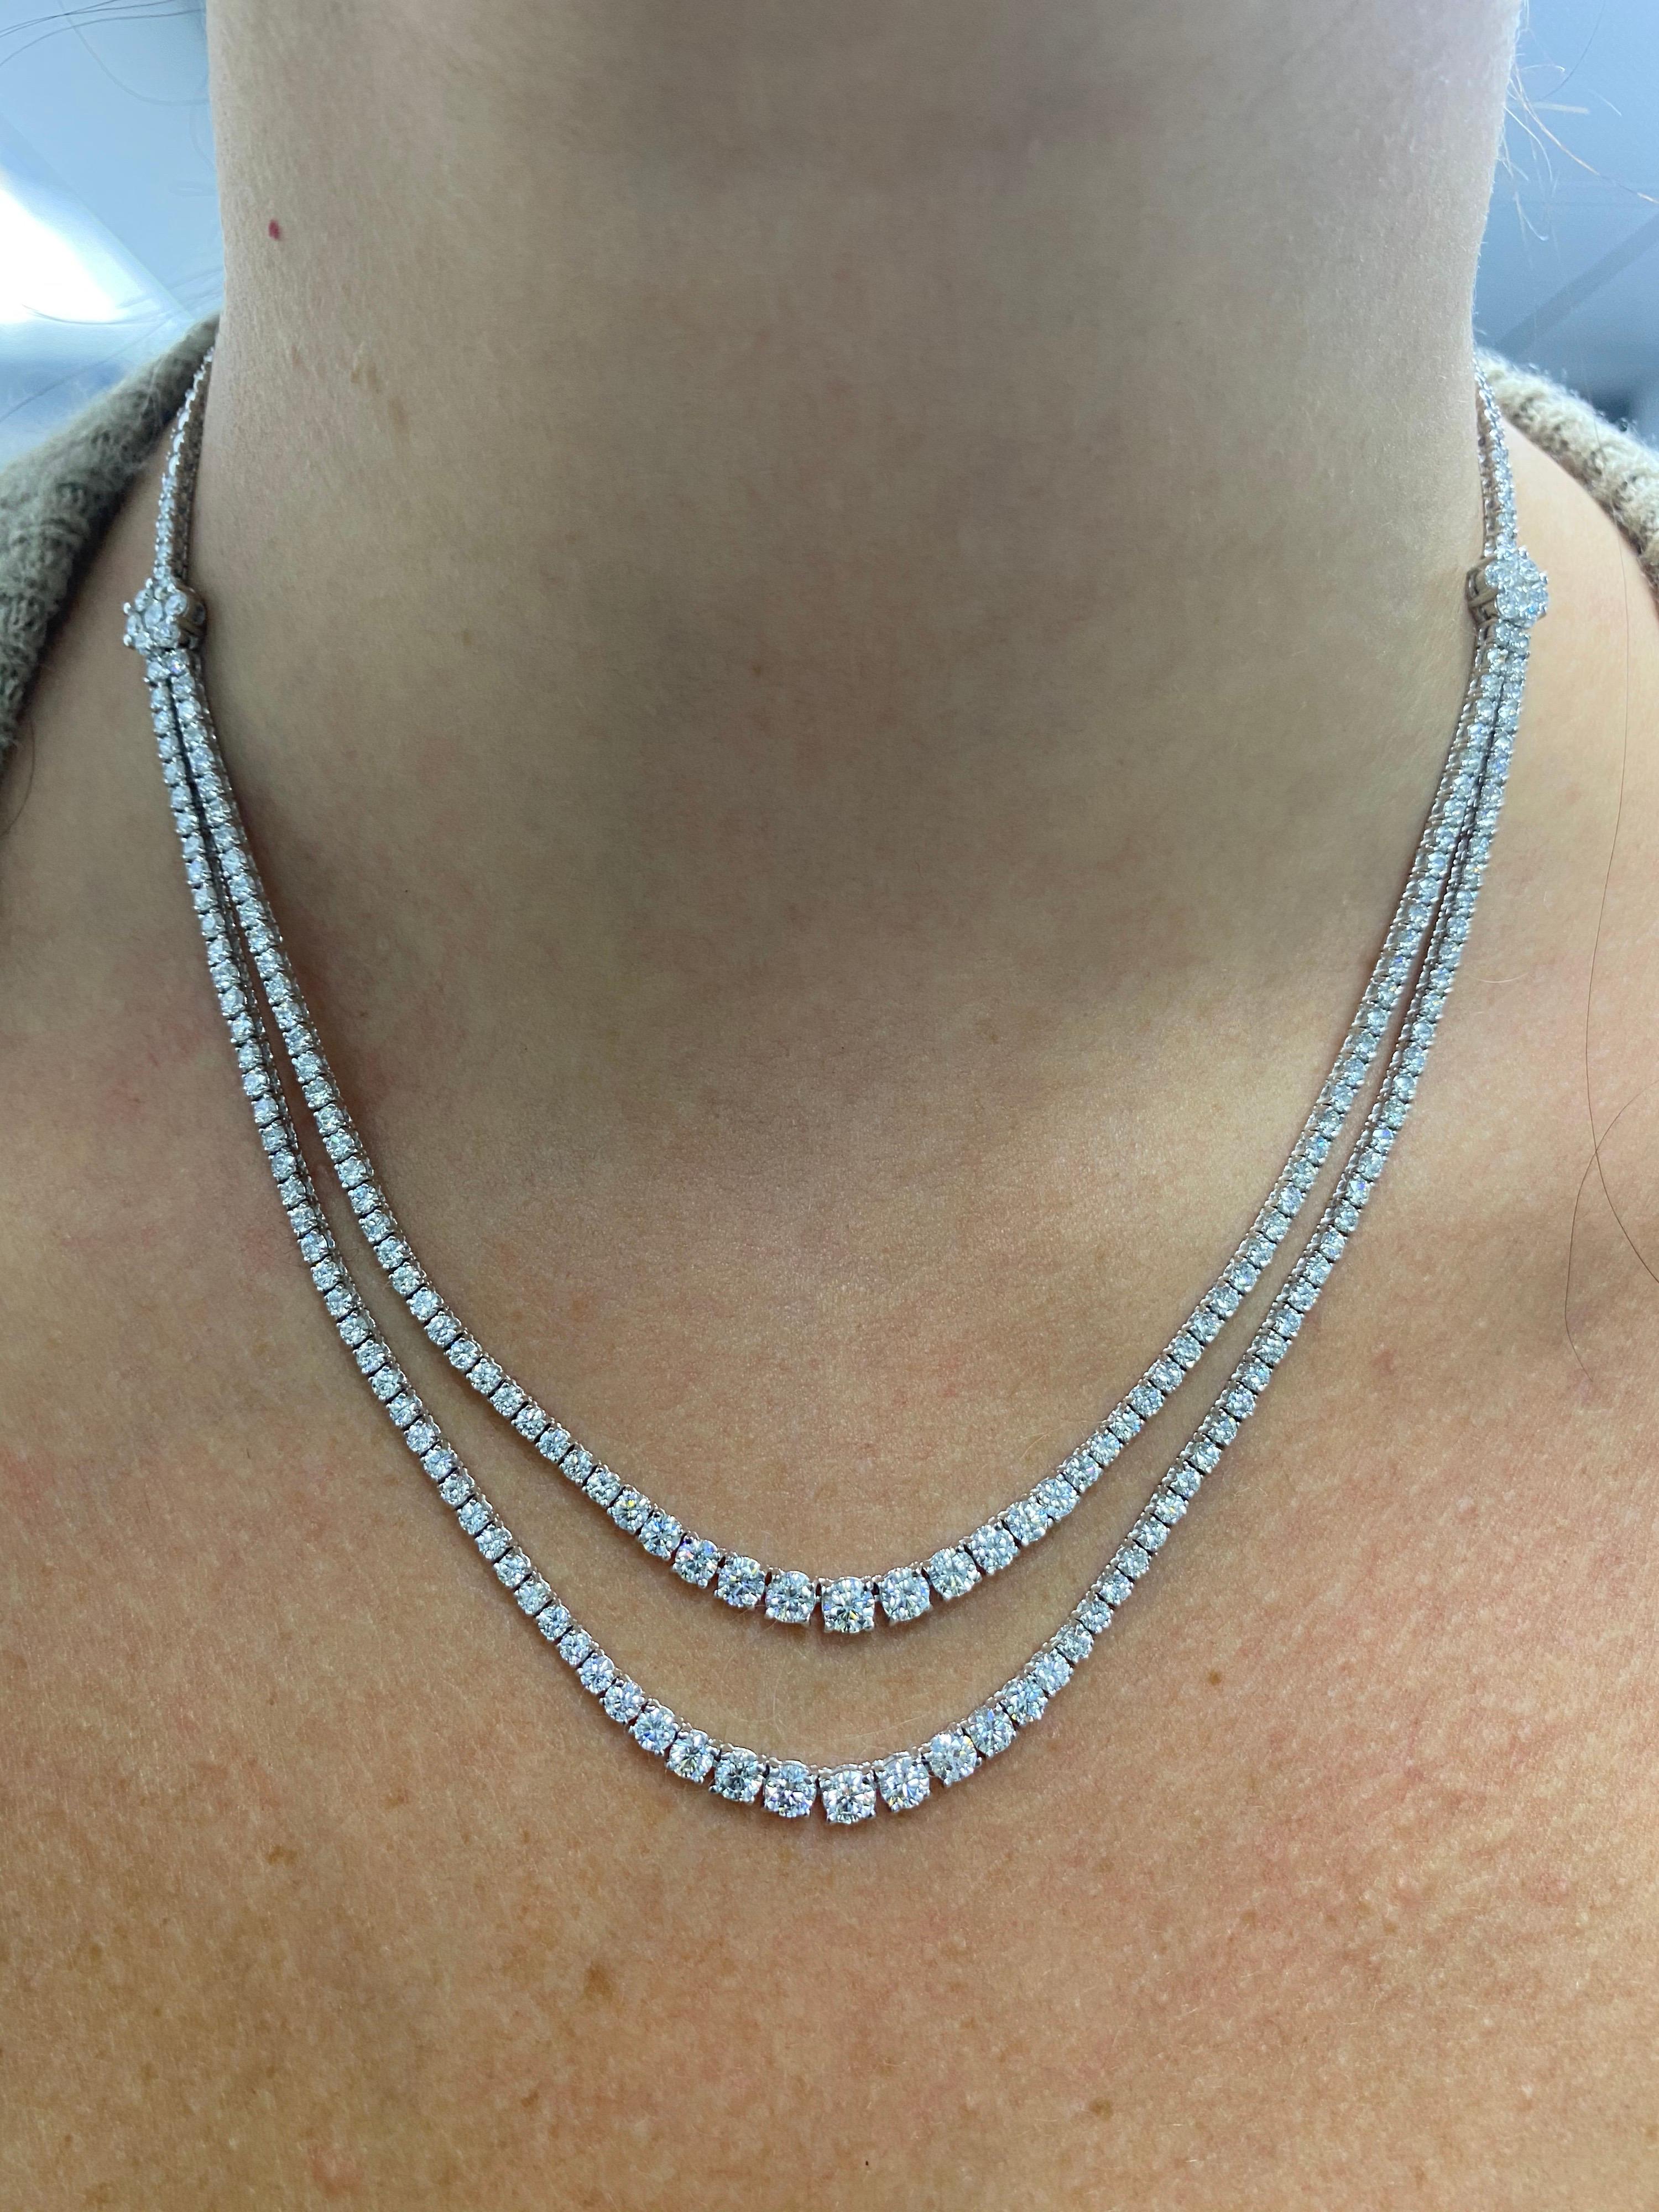 14K White Gold tennis necklace featuring a double diamond row of 182 round brilliants and two diamond clusters with 14 round brilliants weighing 9.33 carats and high polished white gold beads in the back. 
Color G
Clarity SI2